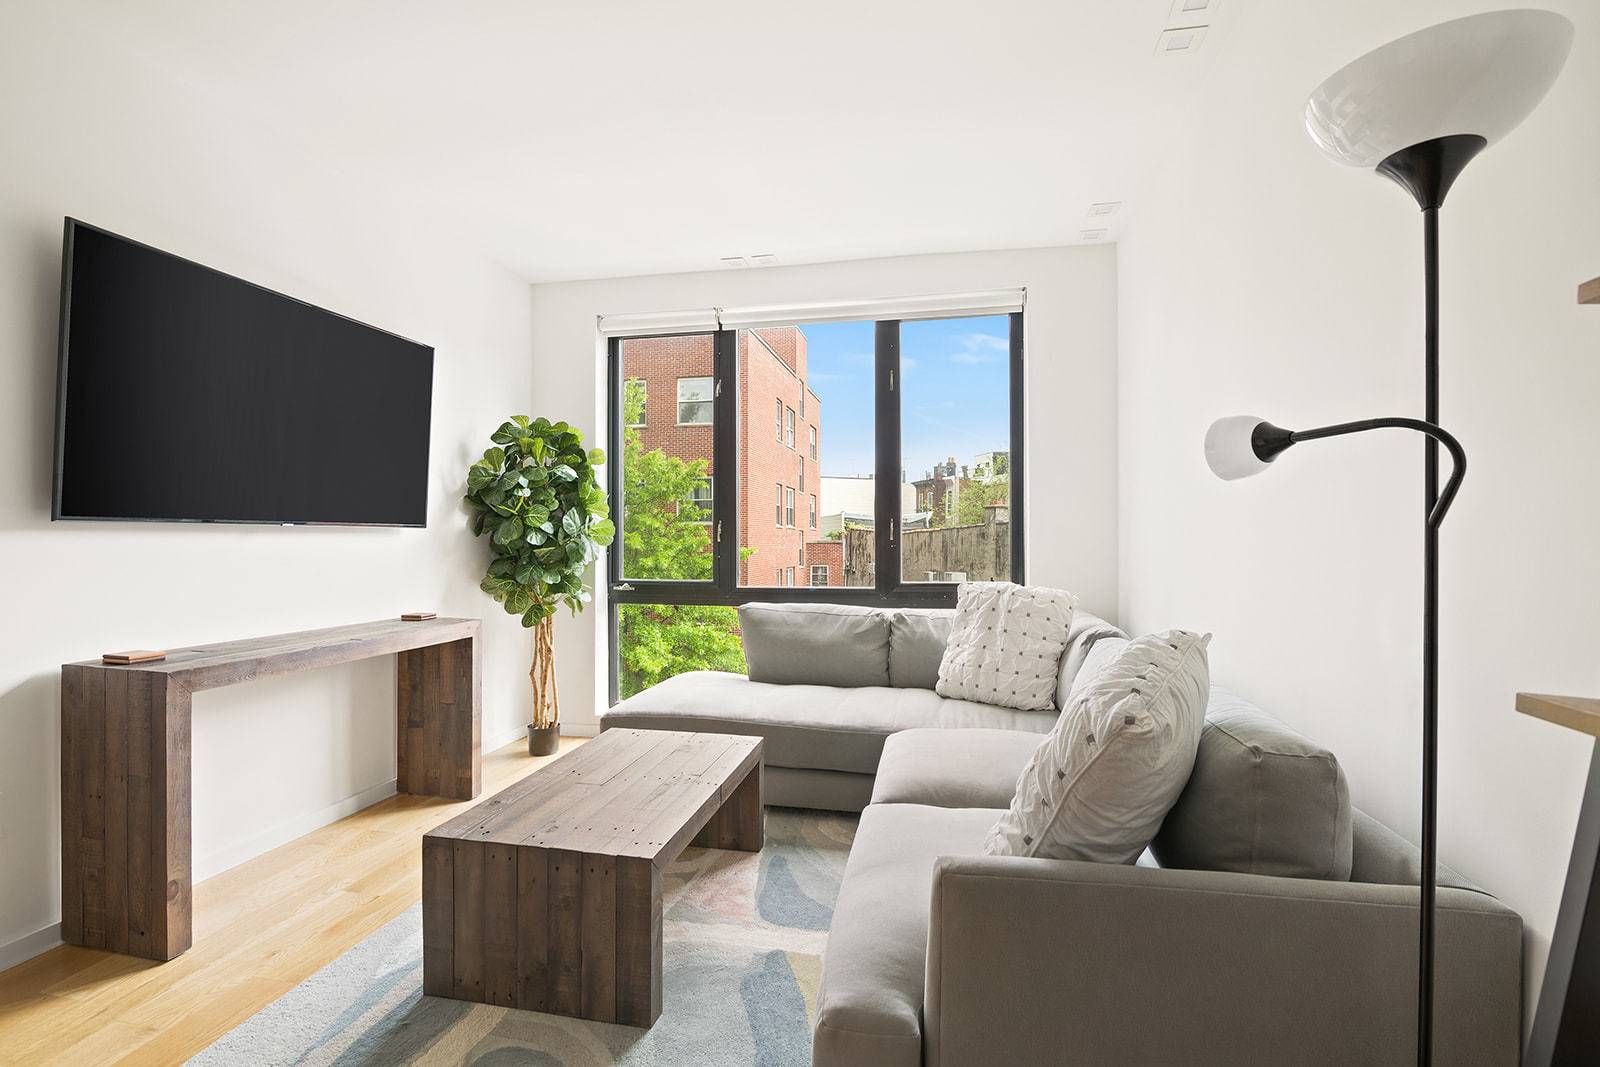 Welcome to 221 Devoe Street, a condominium development nestled in a beautiful quiet tree lined block in the heart of vibrant East Williamsburg.